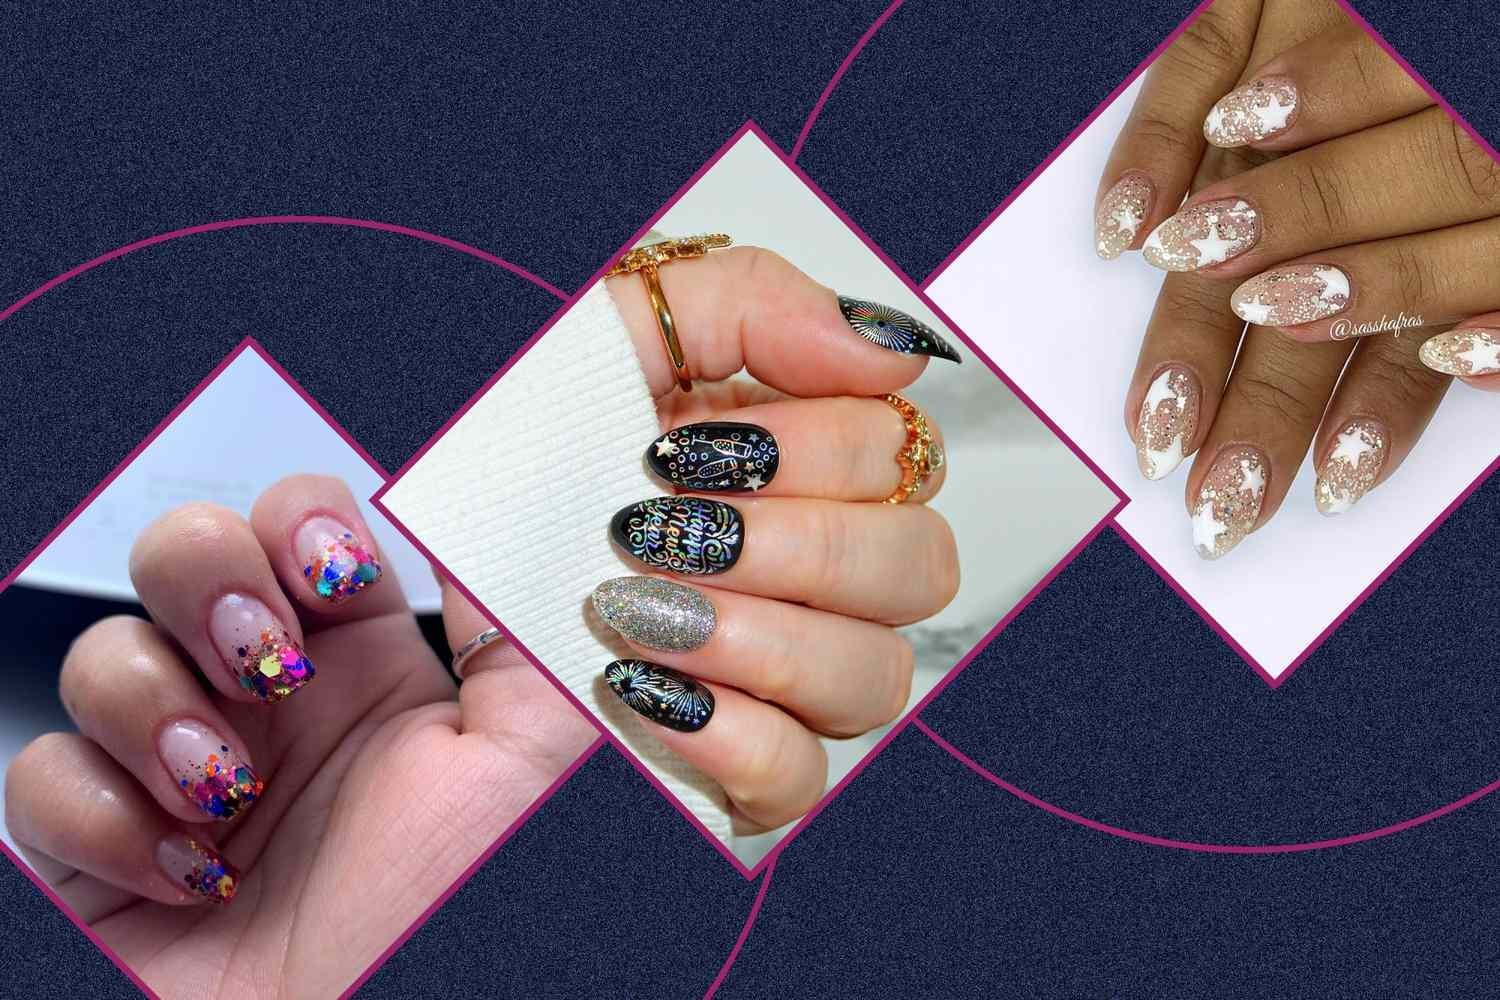 The Nail Art You Should Wear for New Year's Eve, According to Your Zodiac Sign